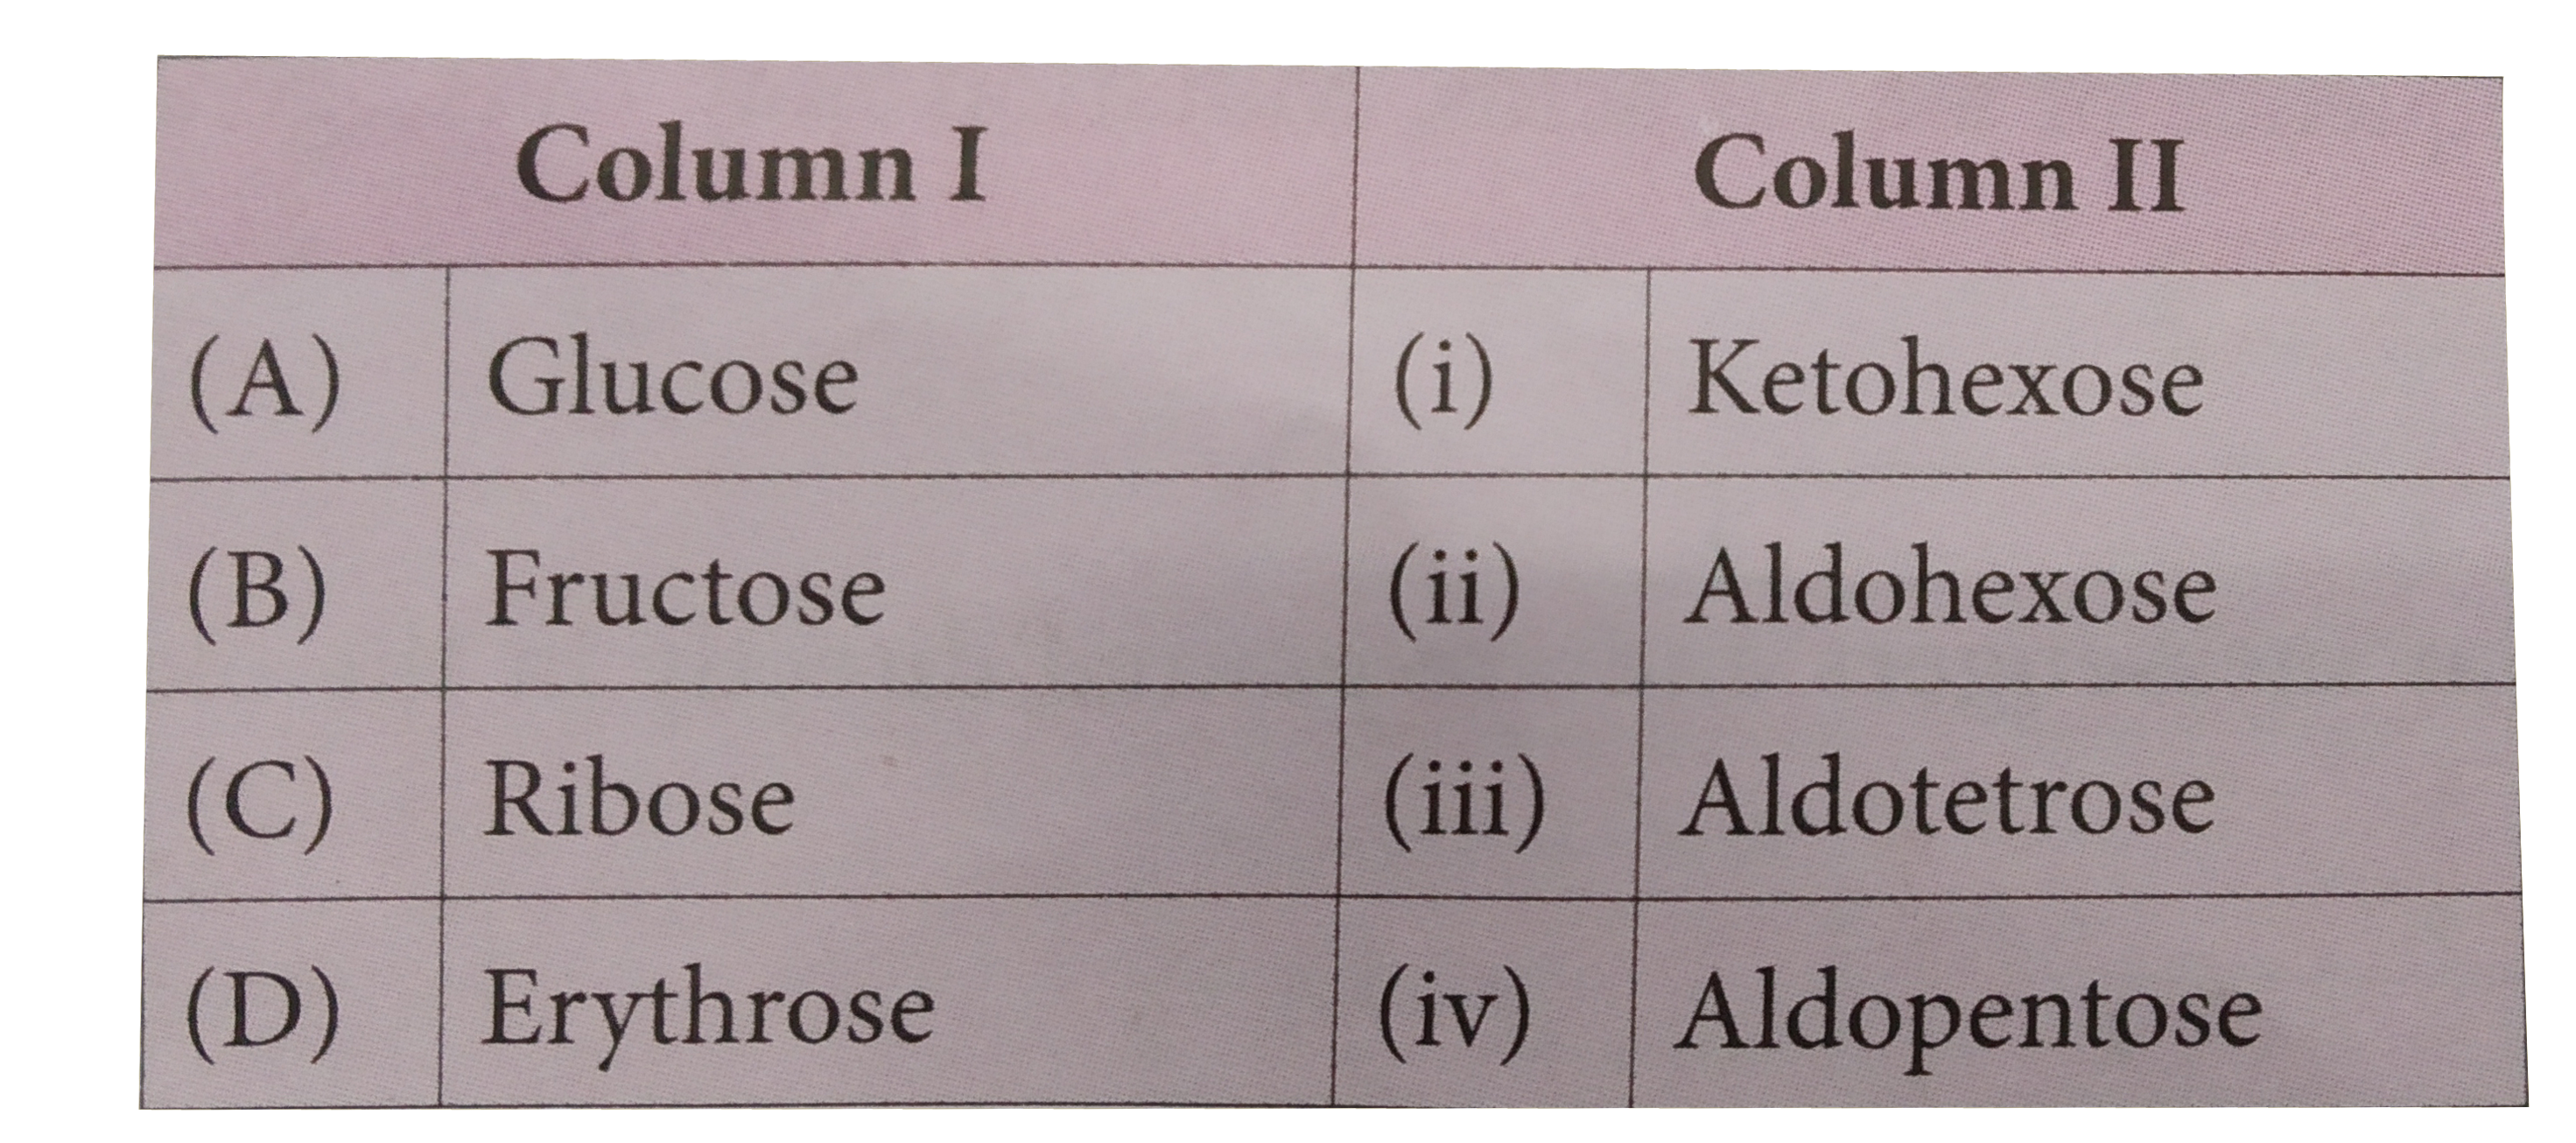 Match the sugars in columns I with their types given in column II and mark the appropriate choice.